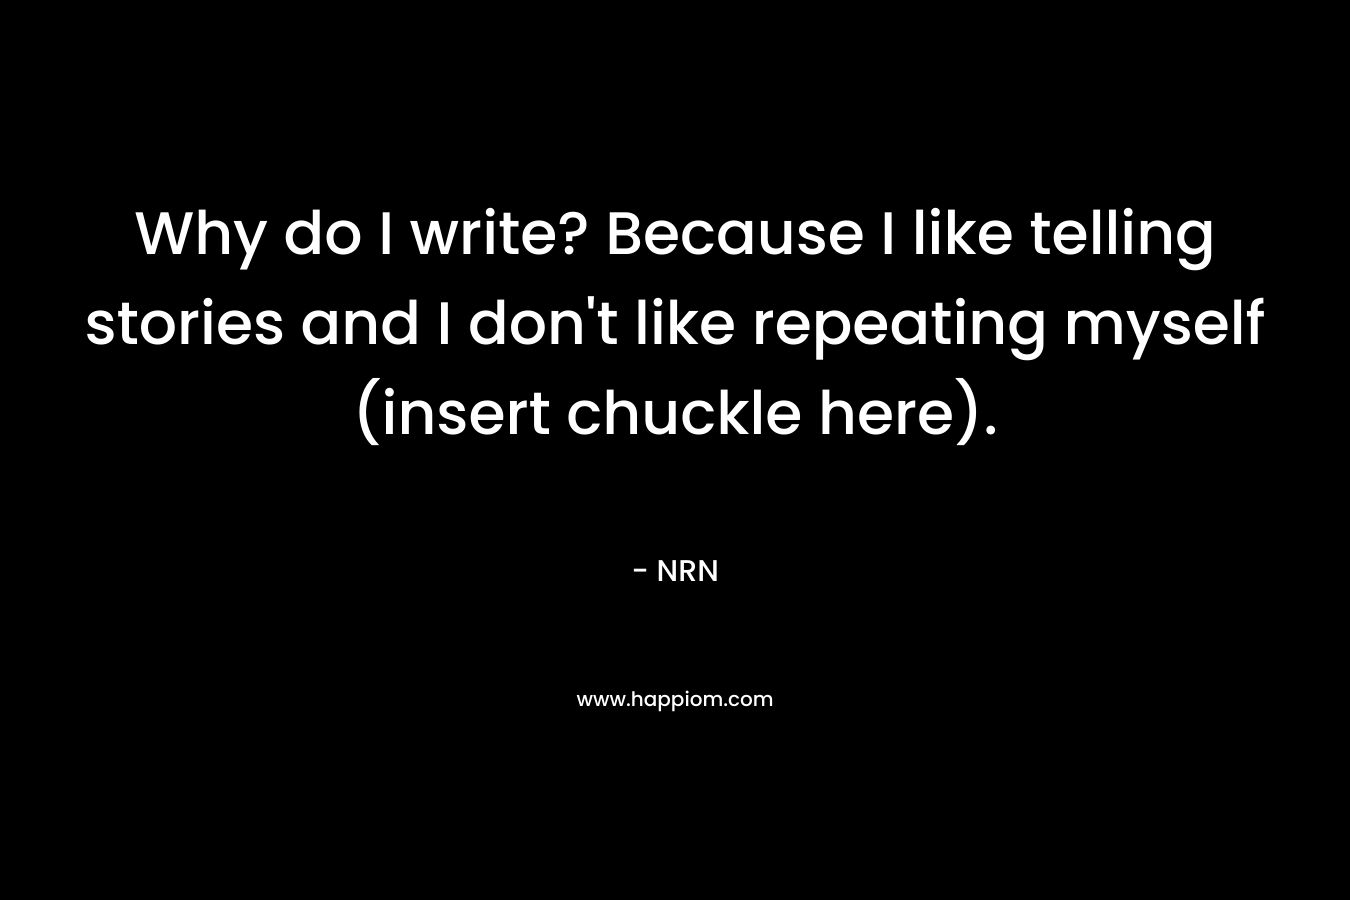 Why do I write? Because I like telling stories and I don’t like repeating myself (insert chuckle here). – NRN